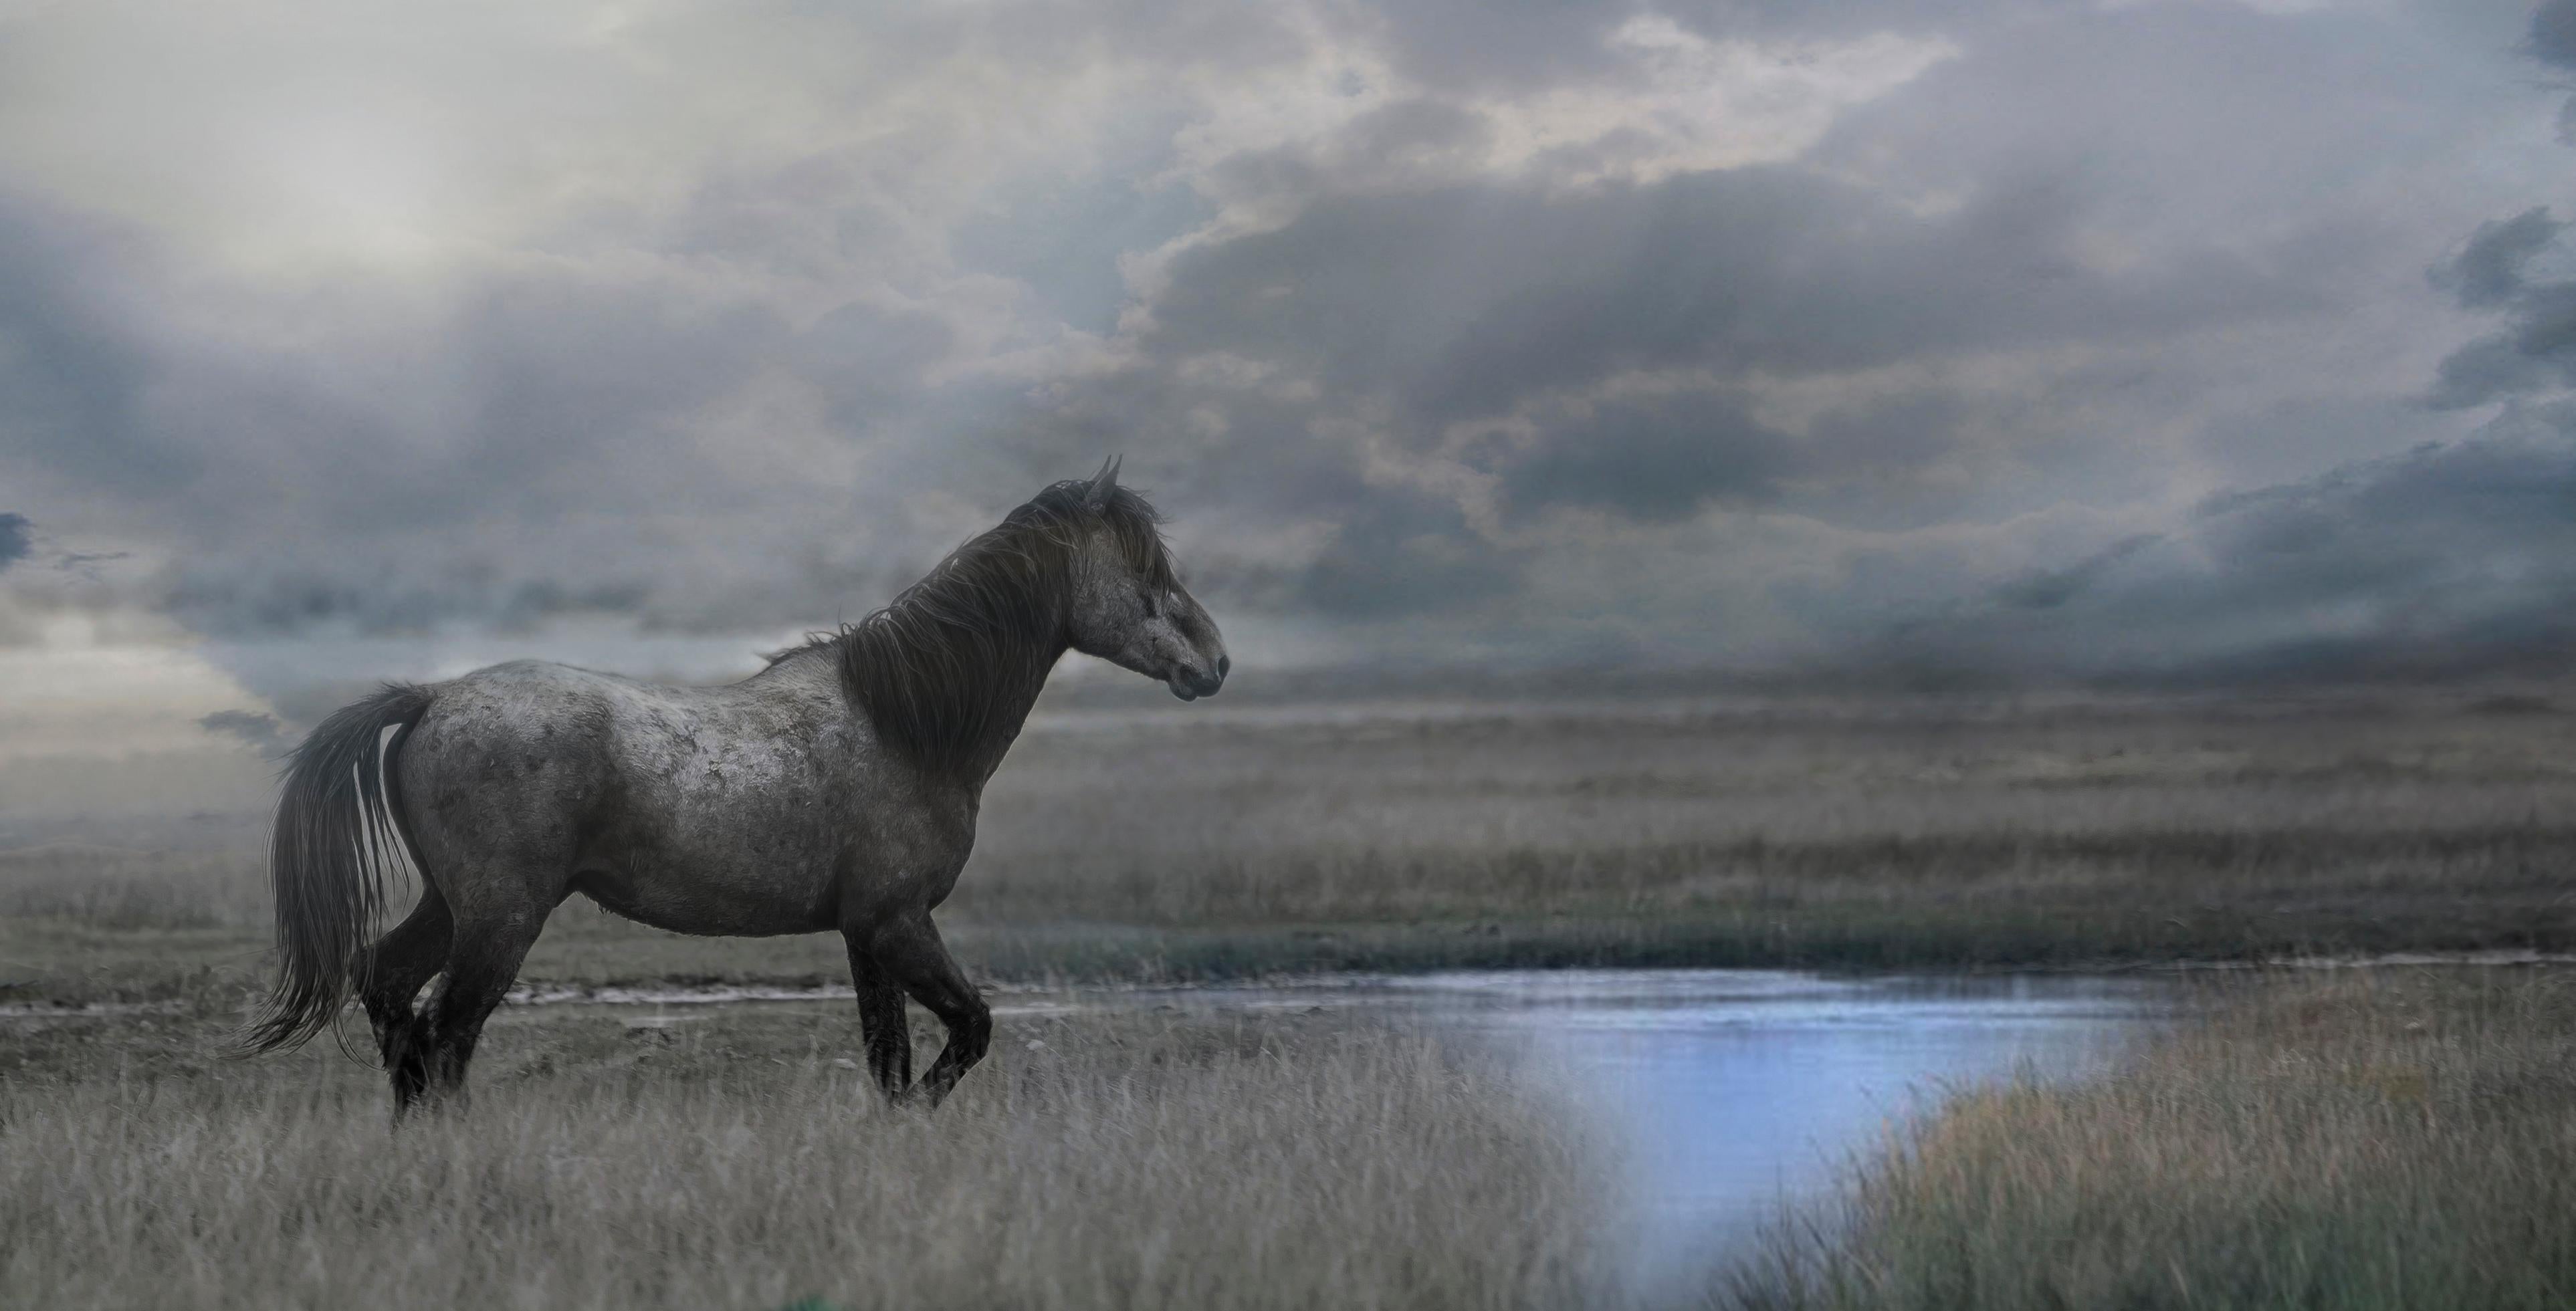 "Once Upon a Time in the West" 30x60, Wild Horse Photography, Mustang Photograph